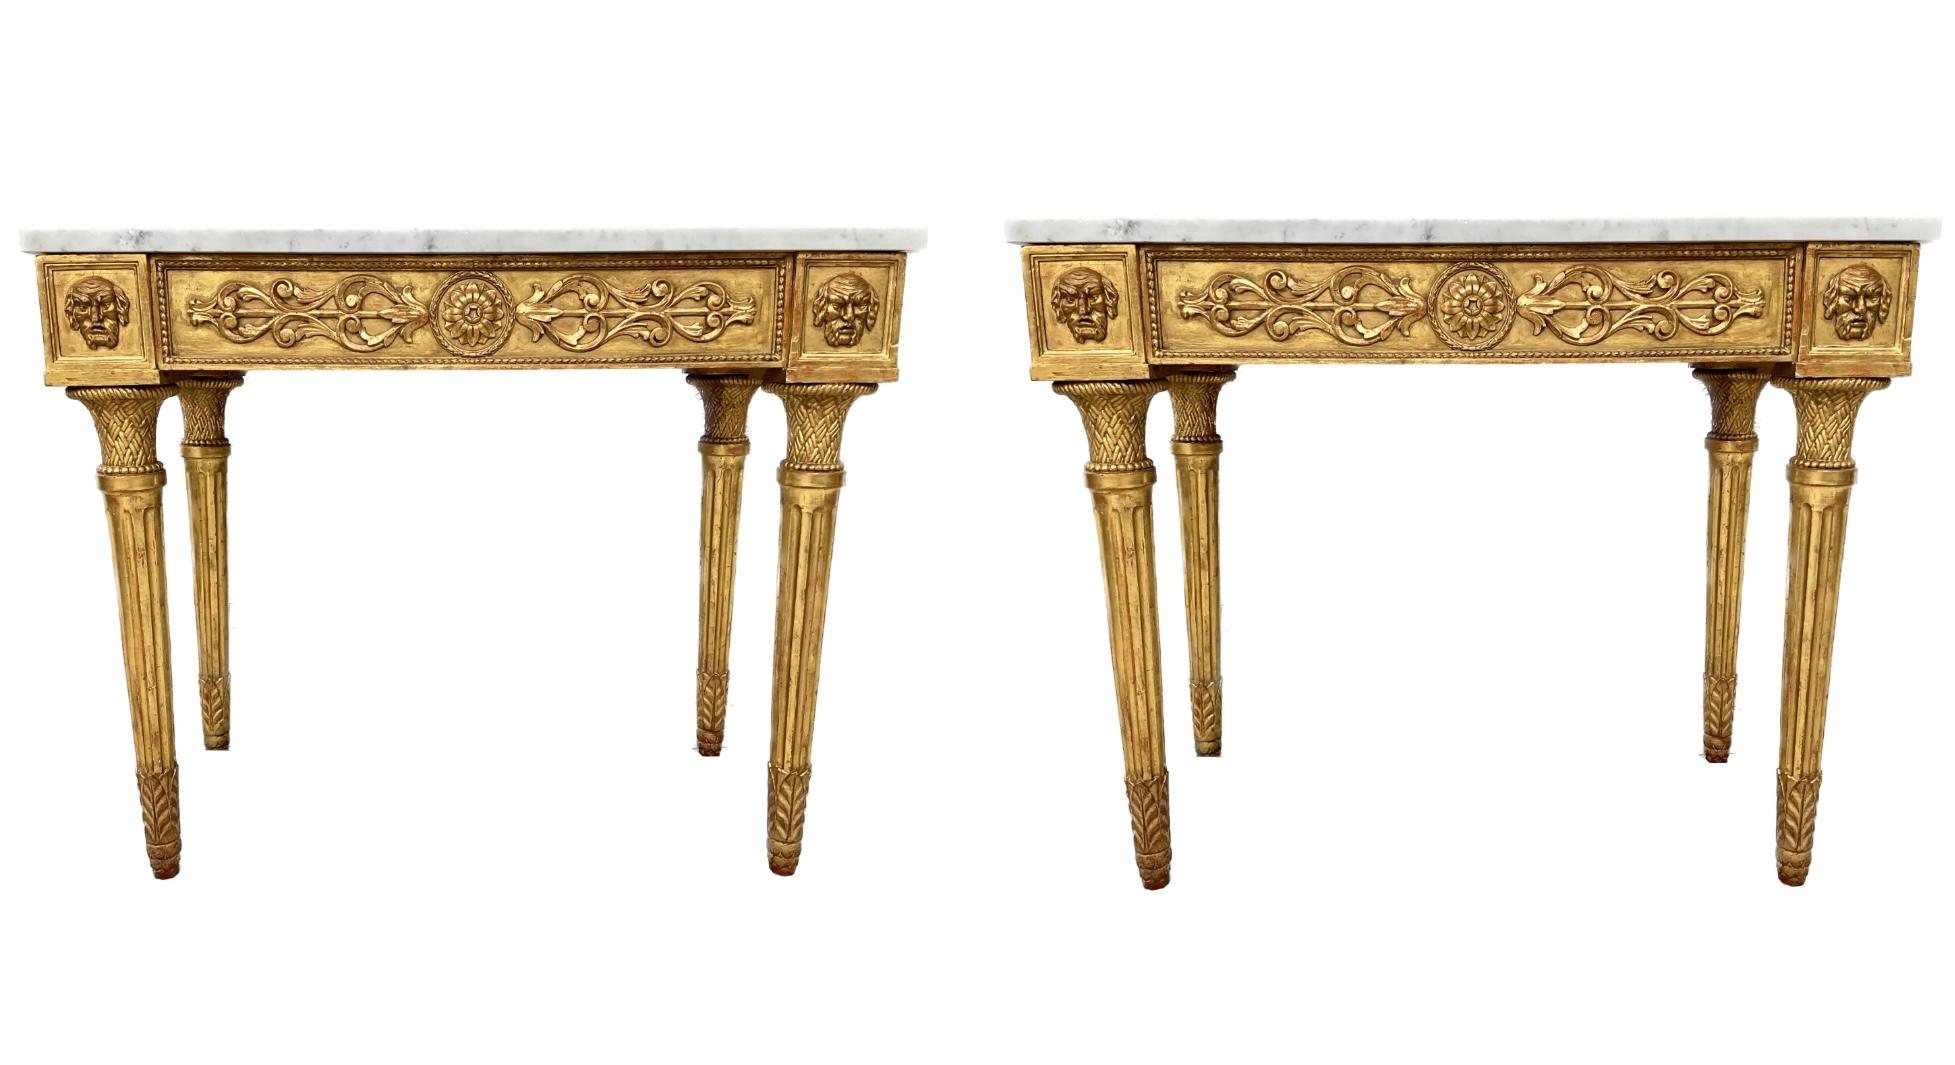 Very fine pair of Italian neoclassical style giltwood console tables with white Carrara marble tops. Bases feature a giltwood paneled frieze carved with roundels applied with flowerheads with egg-and-dart moulding. Each corner with applied giltwood